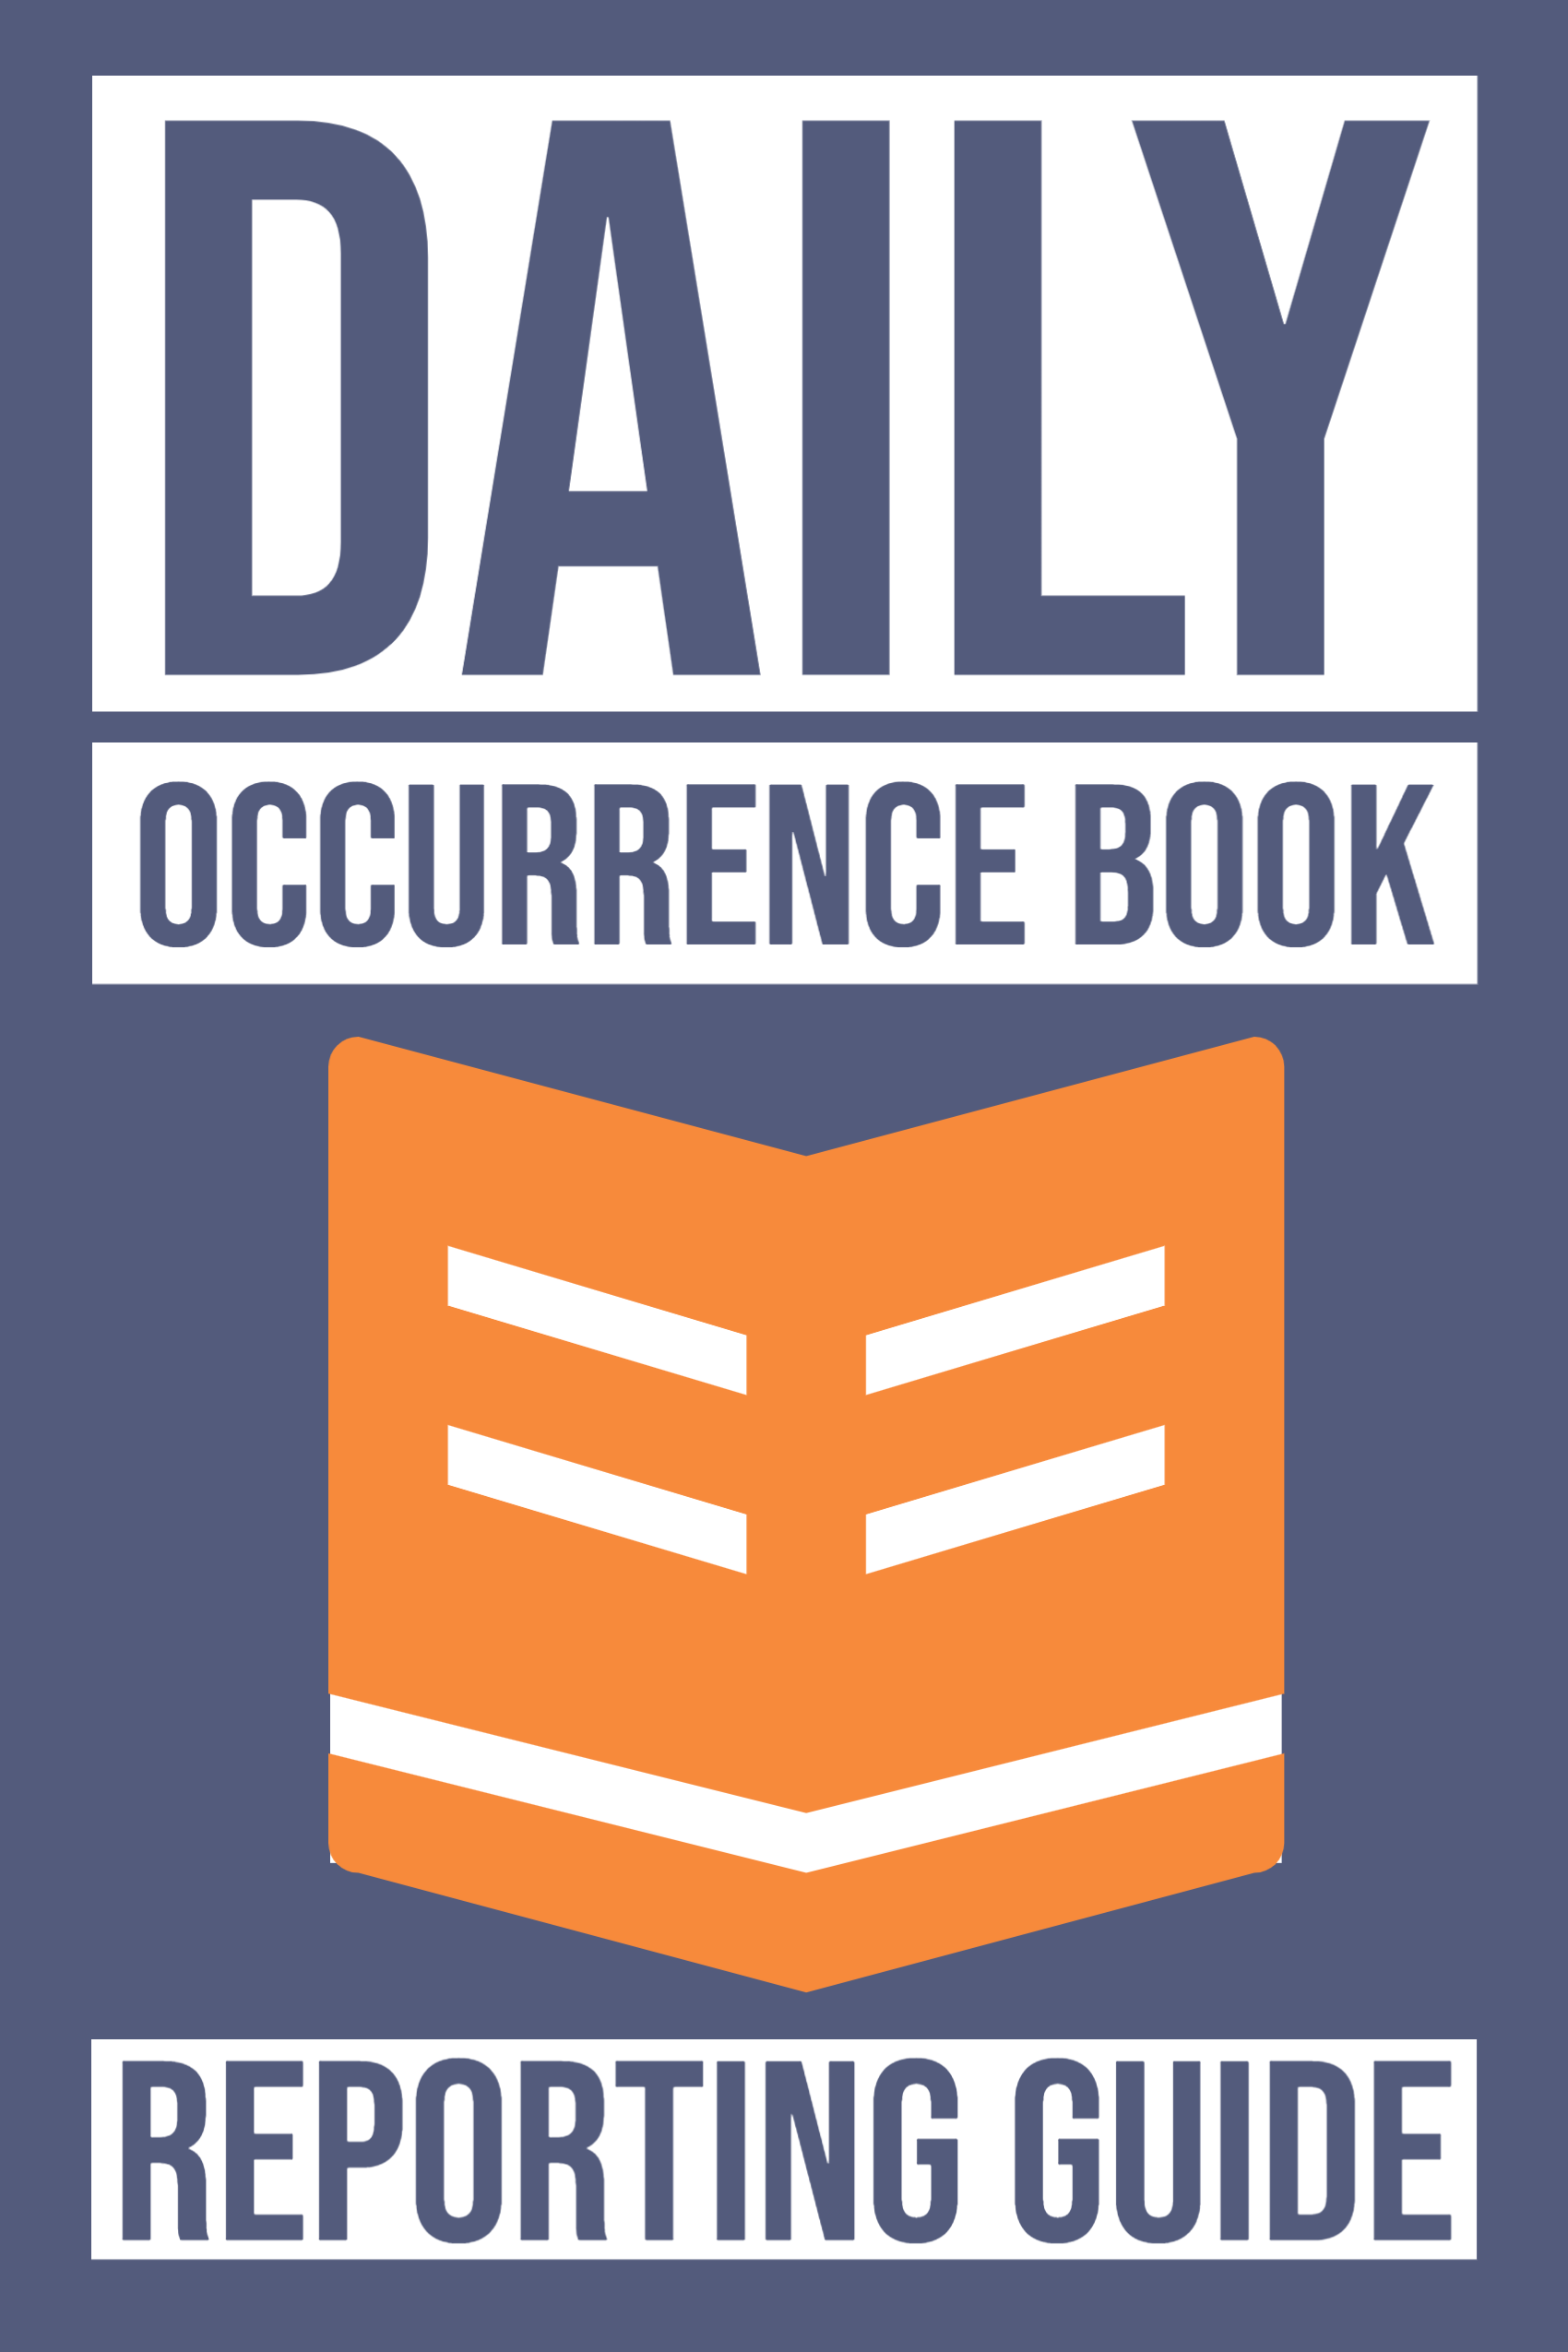 Daily Occurrence Book Report - You have a daily occurrence book (DOB) and a security guard. Now, only one question remains: what does the security guard record in the daily occurrence book report